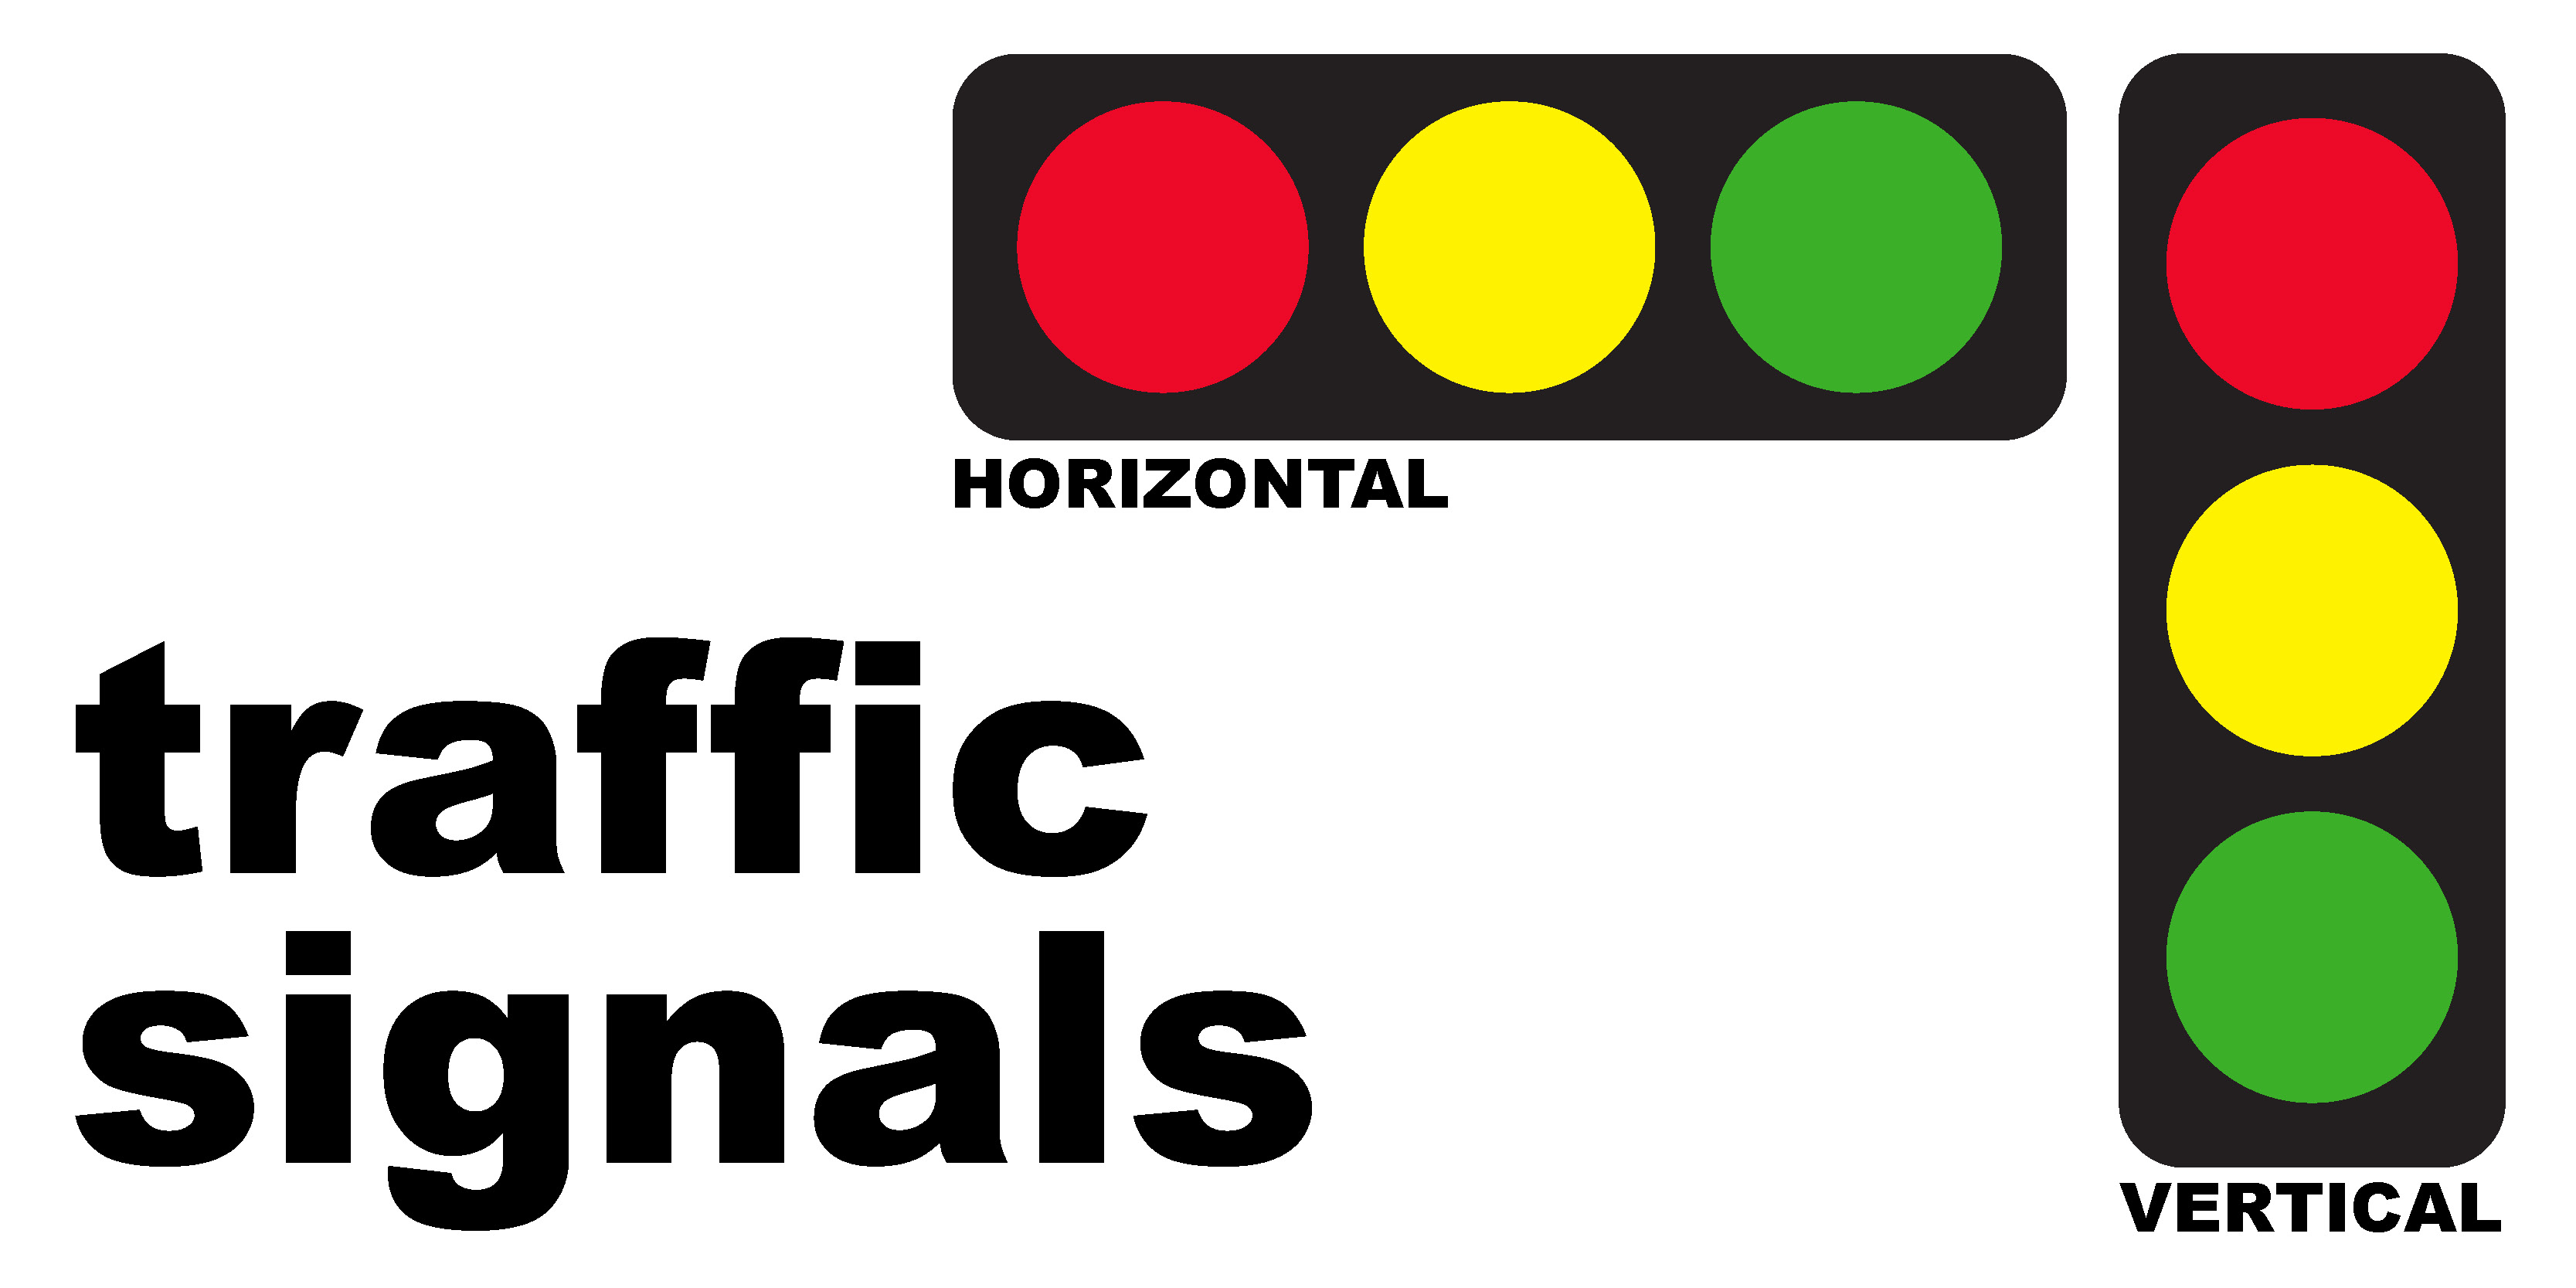 traffic signals horizontal and vertical